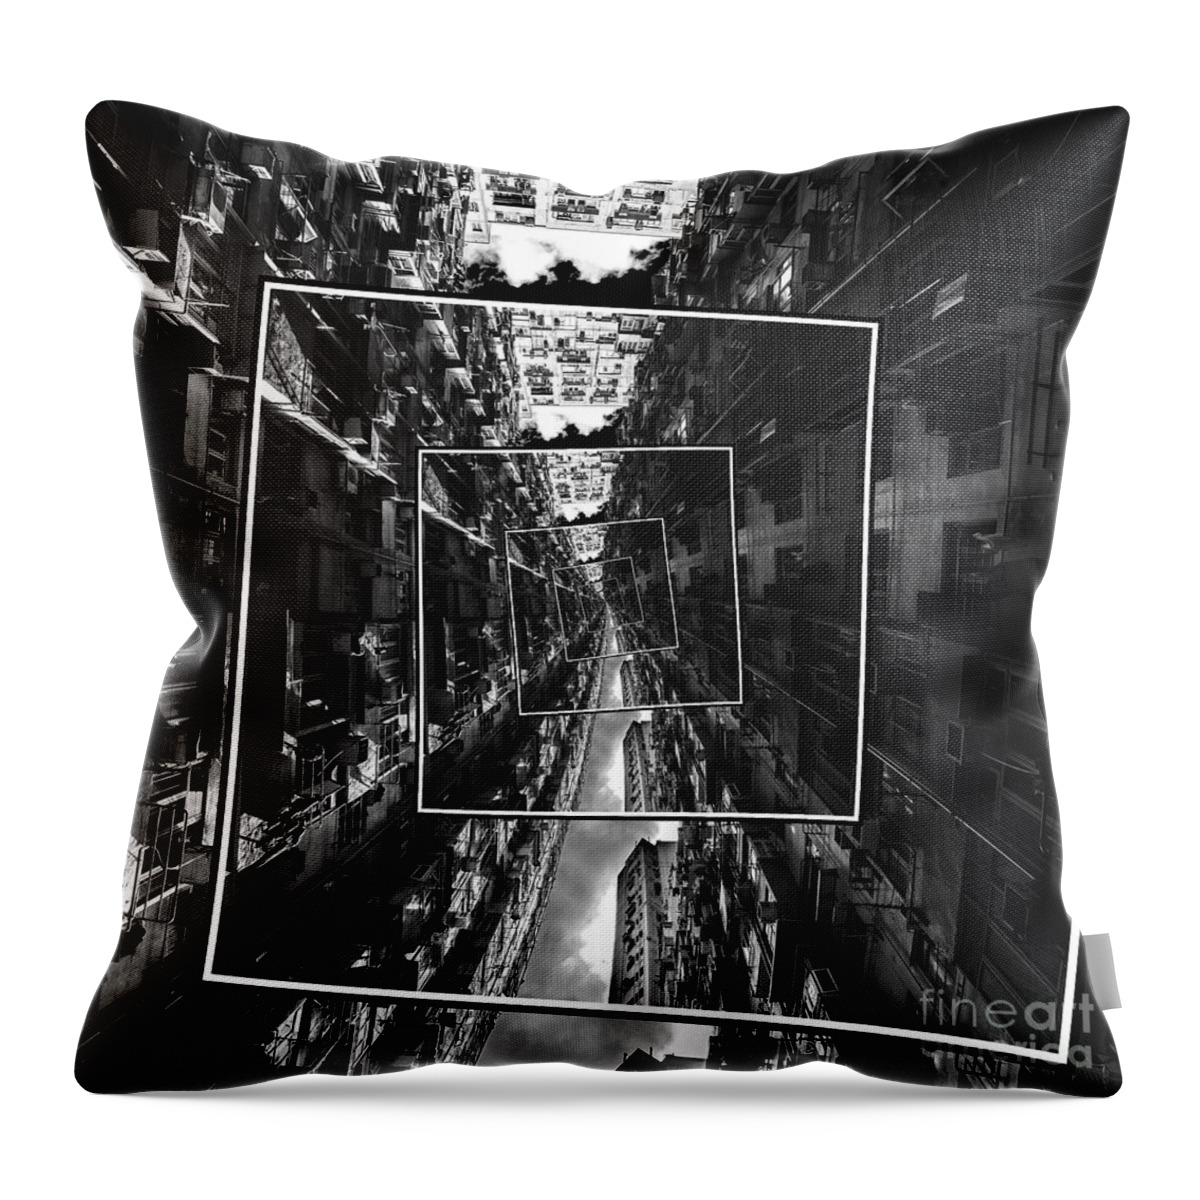 Black And White Throw Pillow featuring the digital art Spinning City by Phil Perkins